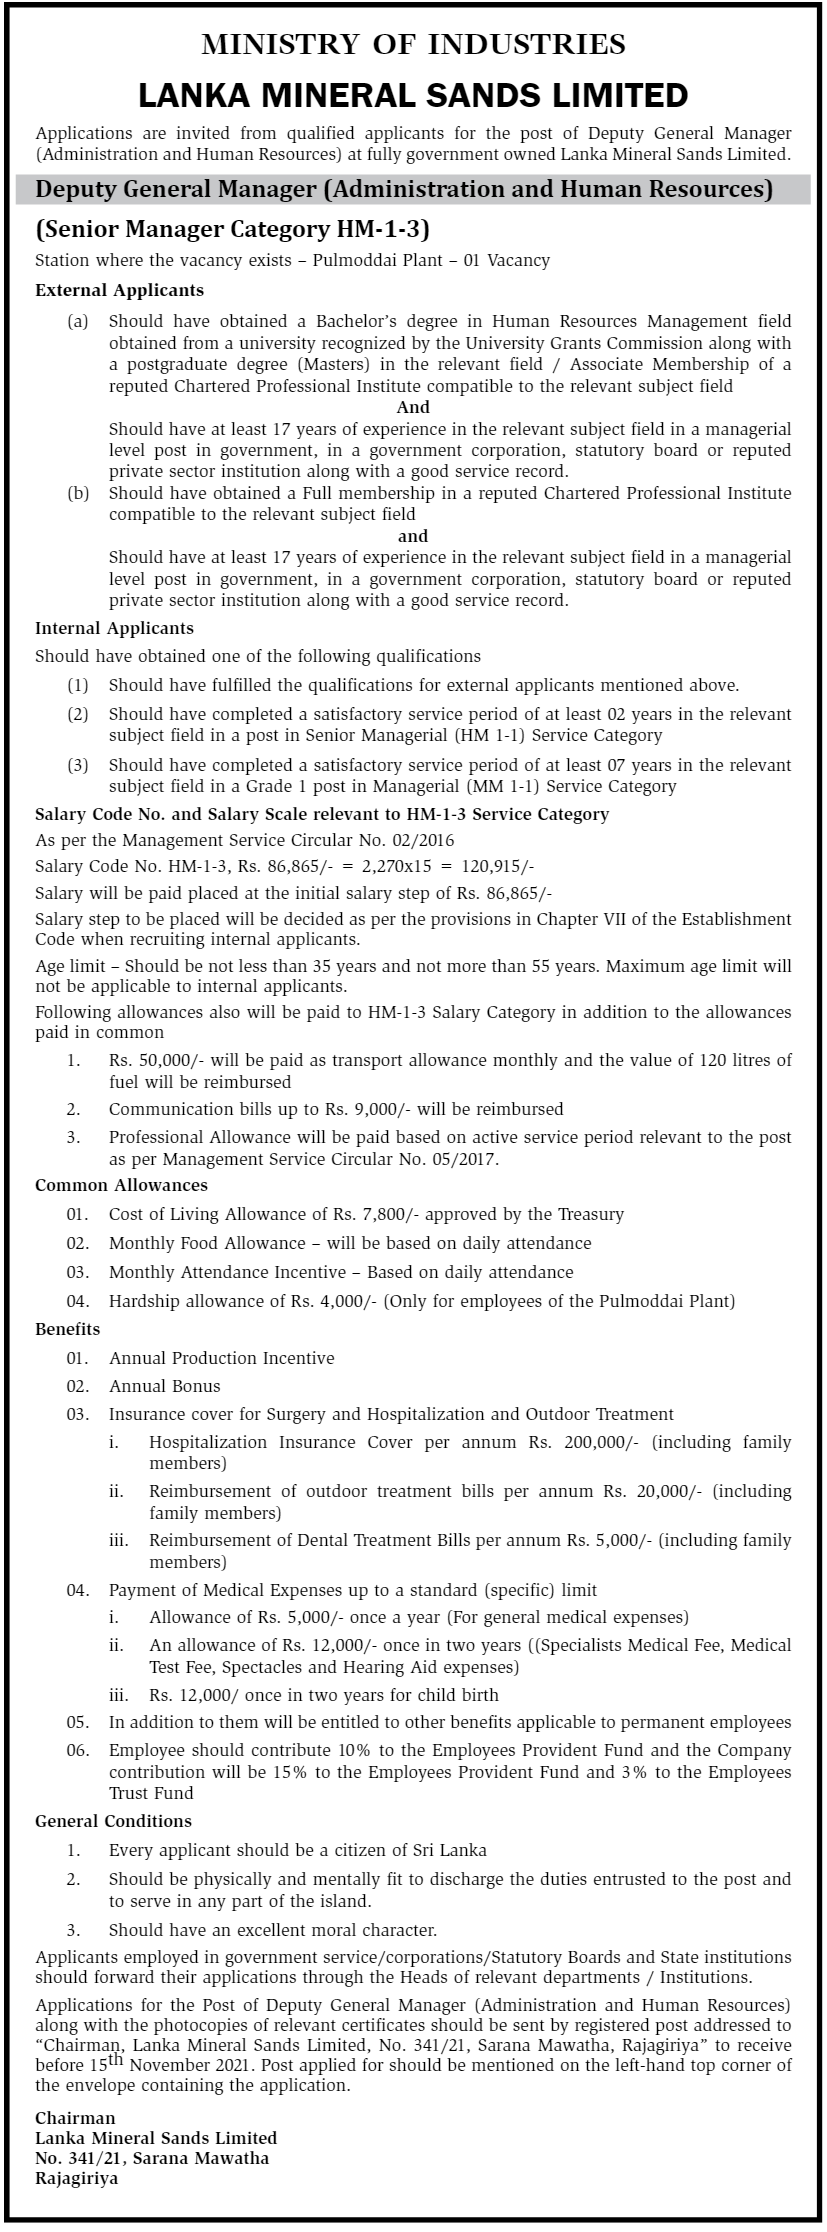 Deputy General Manager (Administration and Human Resources) – Lanka Mineral Sands Limited 2